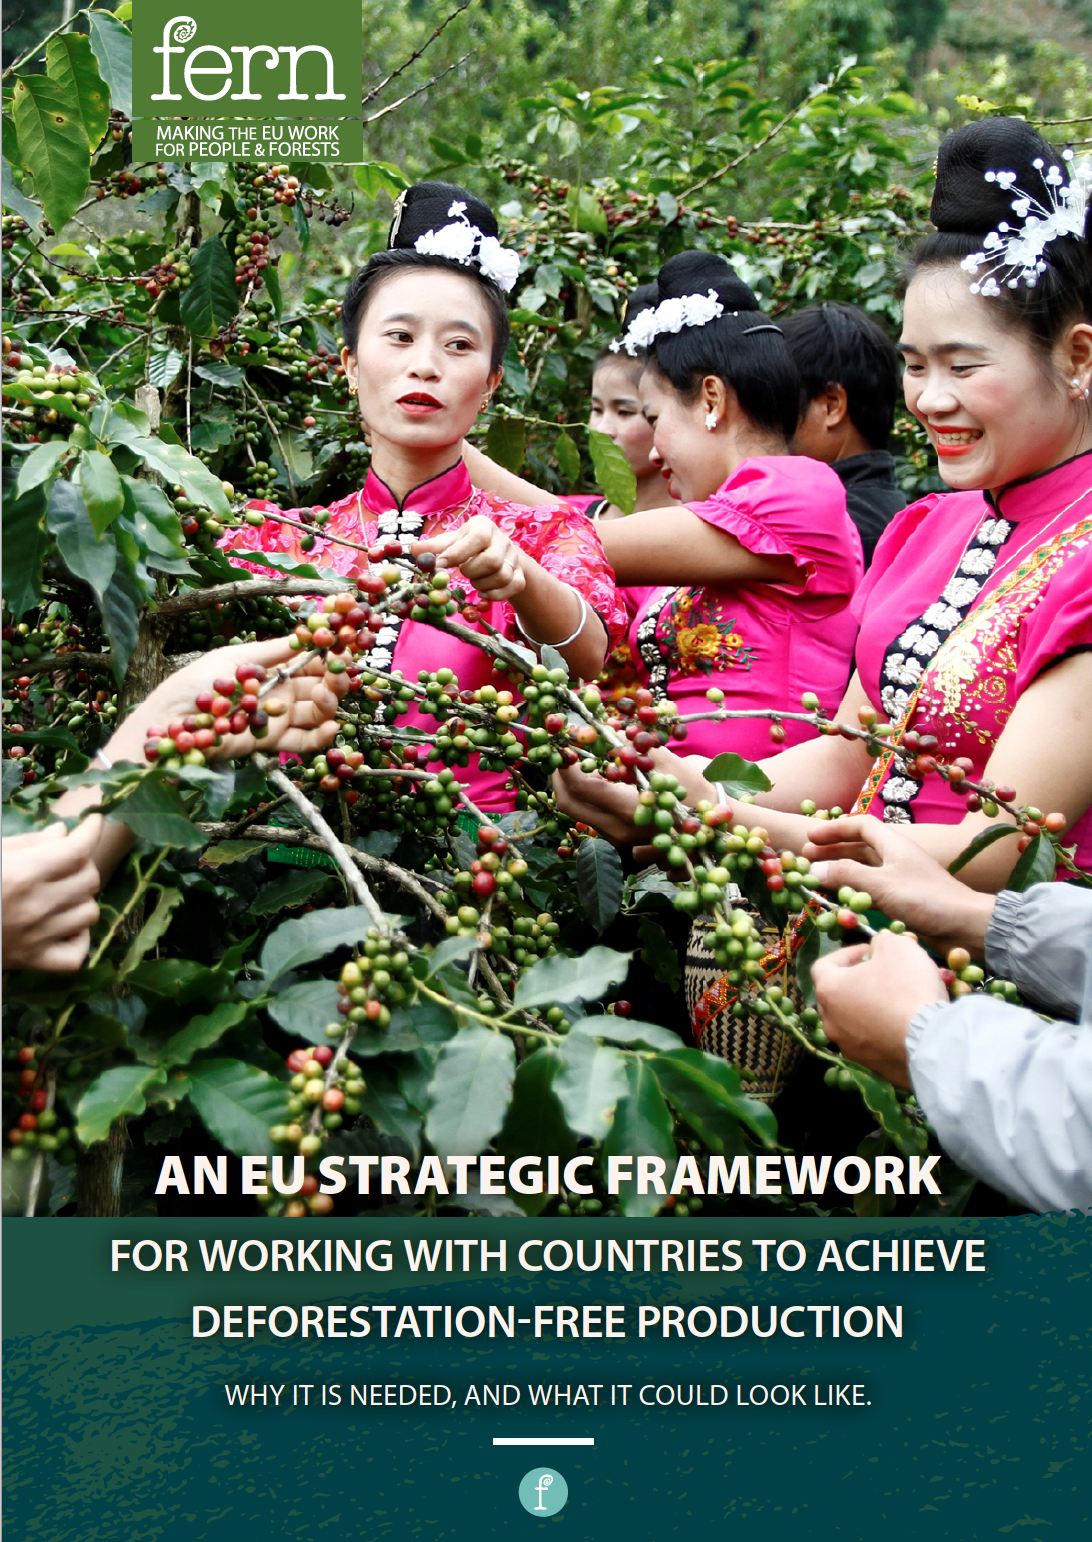 An EU strategic framework for working with countries to achieve deforestation-free production